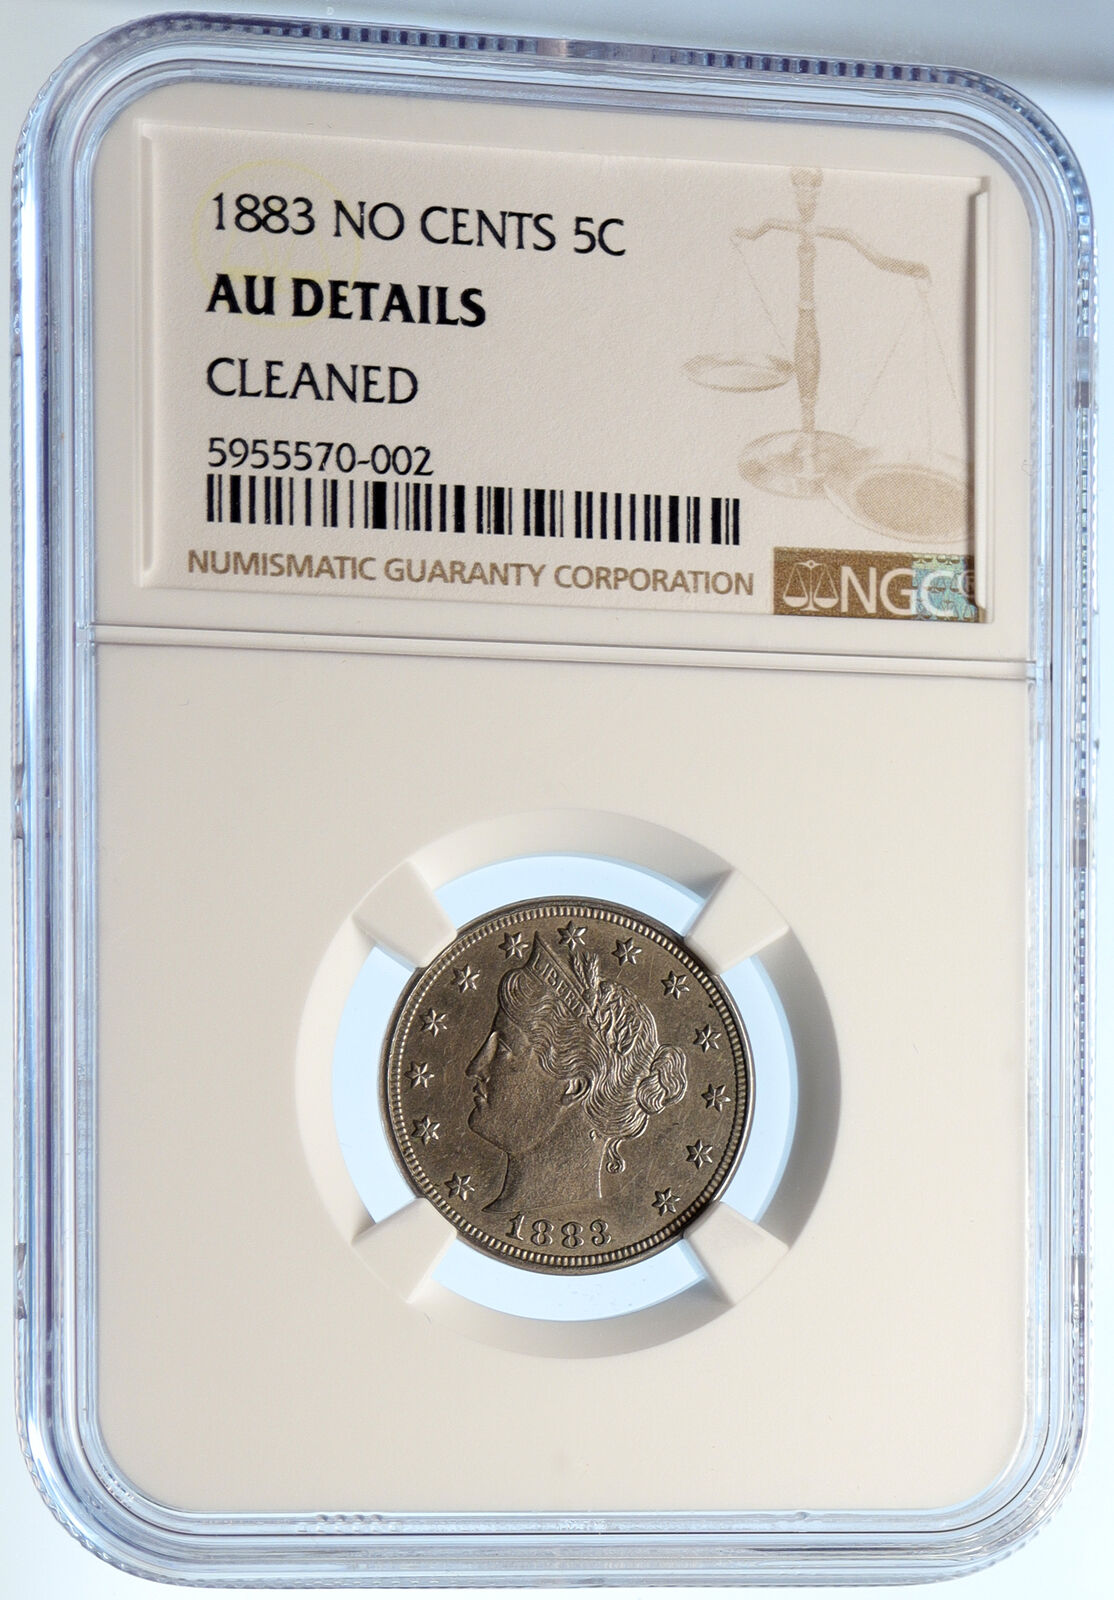 1883 UNITED STATES US LIBERTY Antique NO CENT VINTAGE Nickel 5C Coin NGC i95605